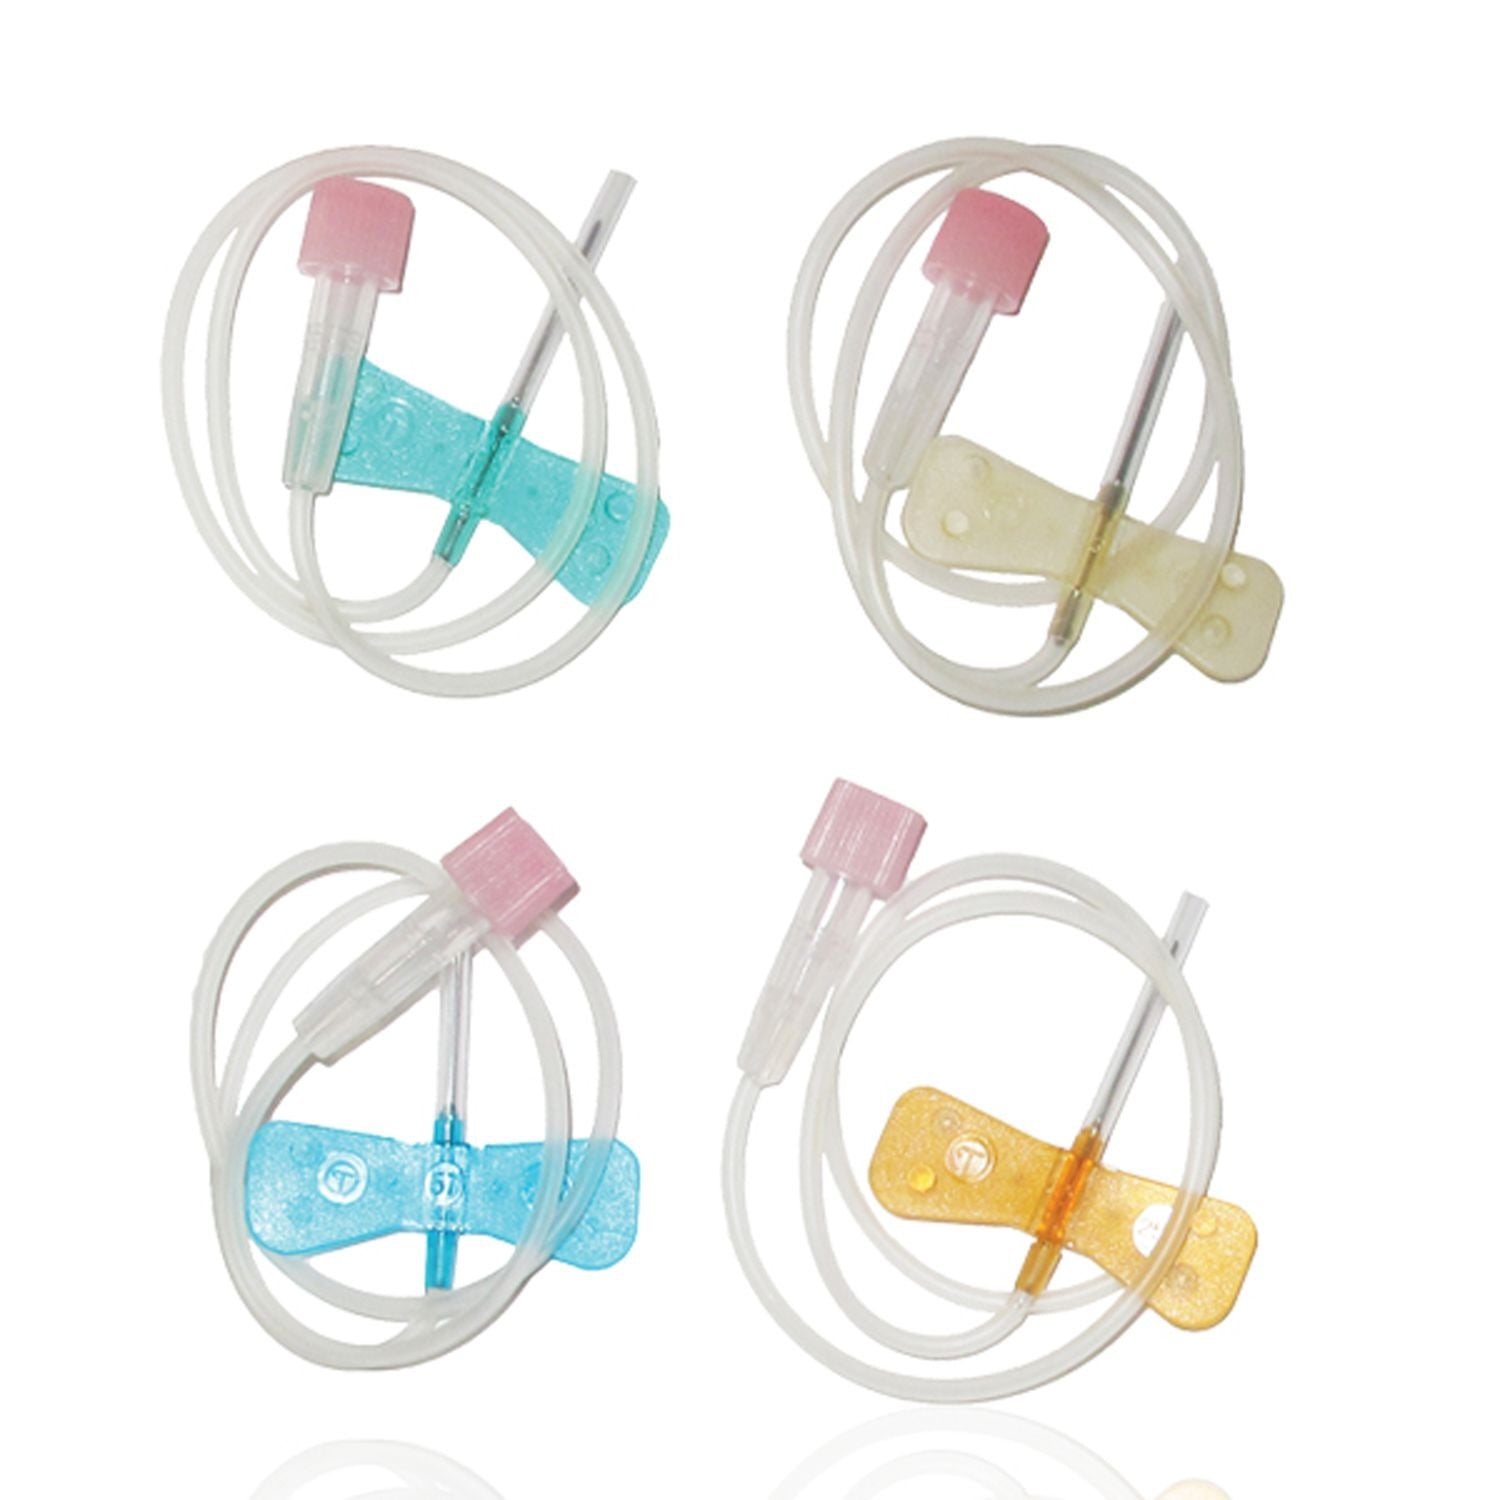 Surshield Surflo Cannula Intravenous Winged Infusion Set | 23G x 30cm | Pack of 50